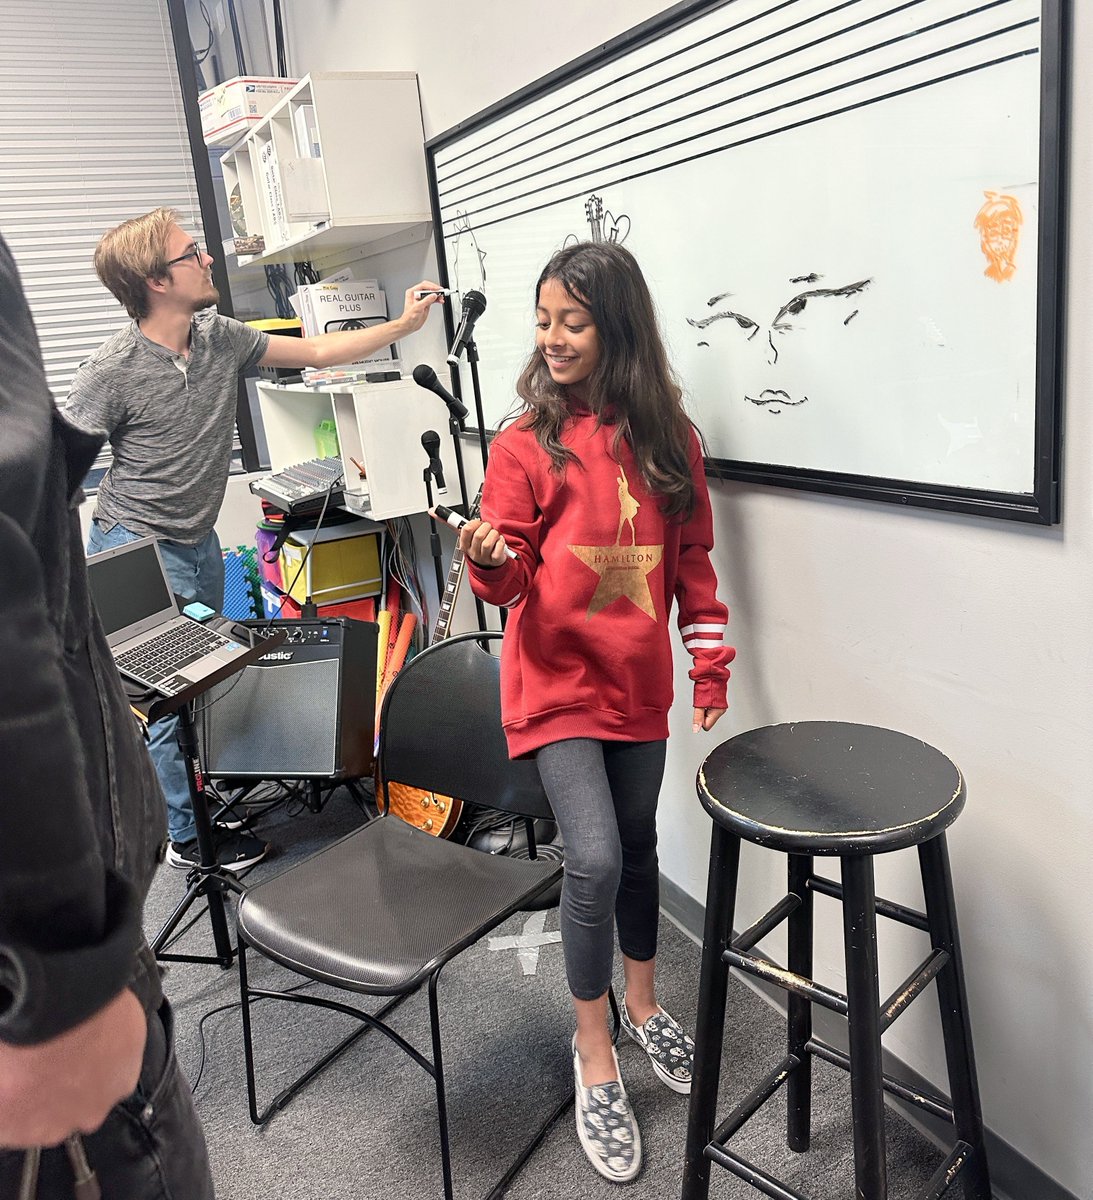 Unleashing creativity AND mastering strings! 🎨🎸 A few of our talented guitar students add a splash of artistry to the classroom whiteboards! buff.ly/3lo1vaG #musiceducation #guitarlessons #guitarclasses #musichousekc #musicschool